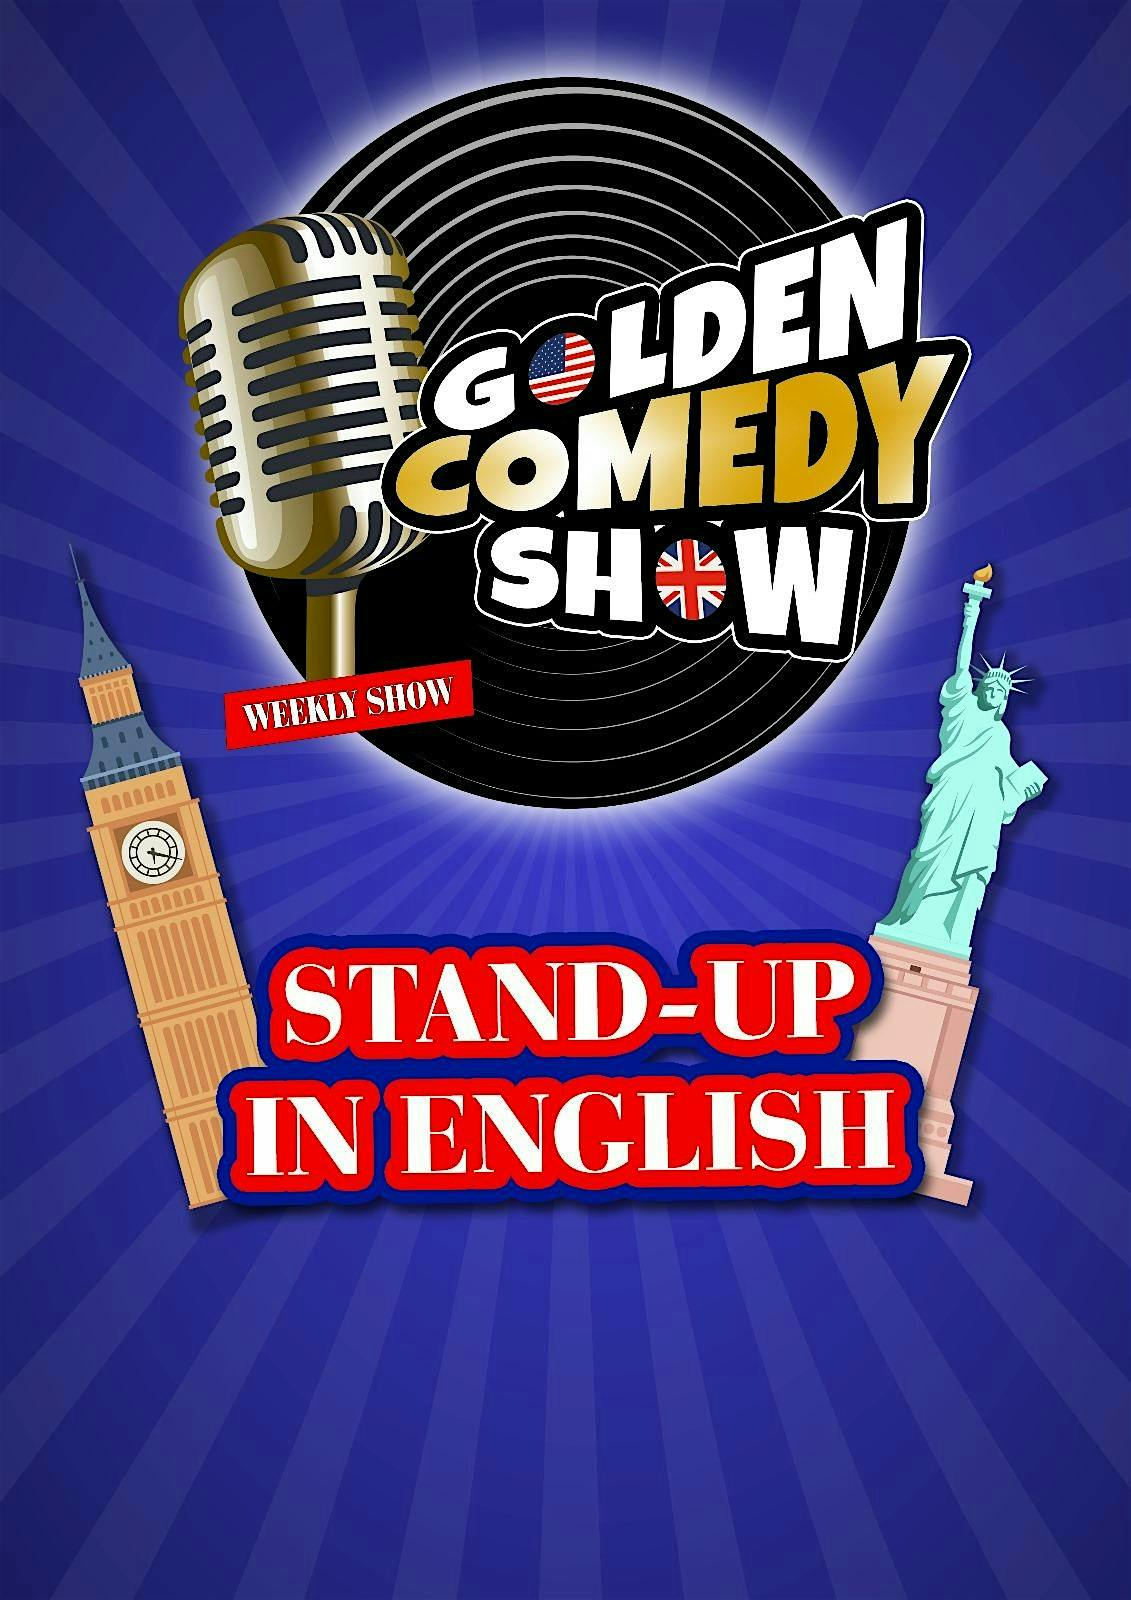 Golden Comedy Show : Stand-Up In English logo